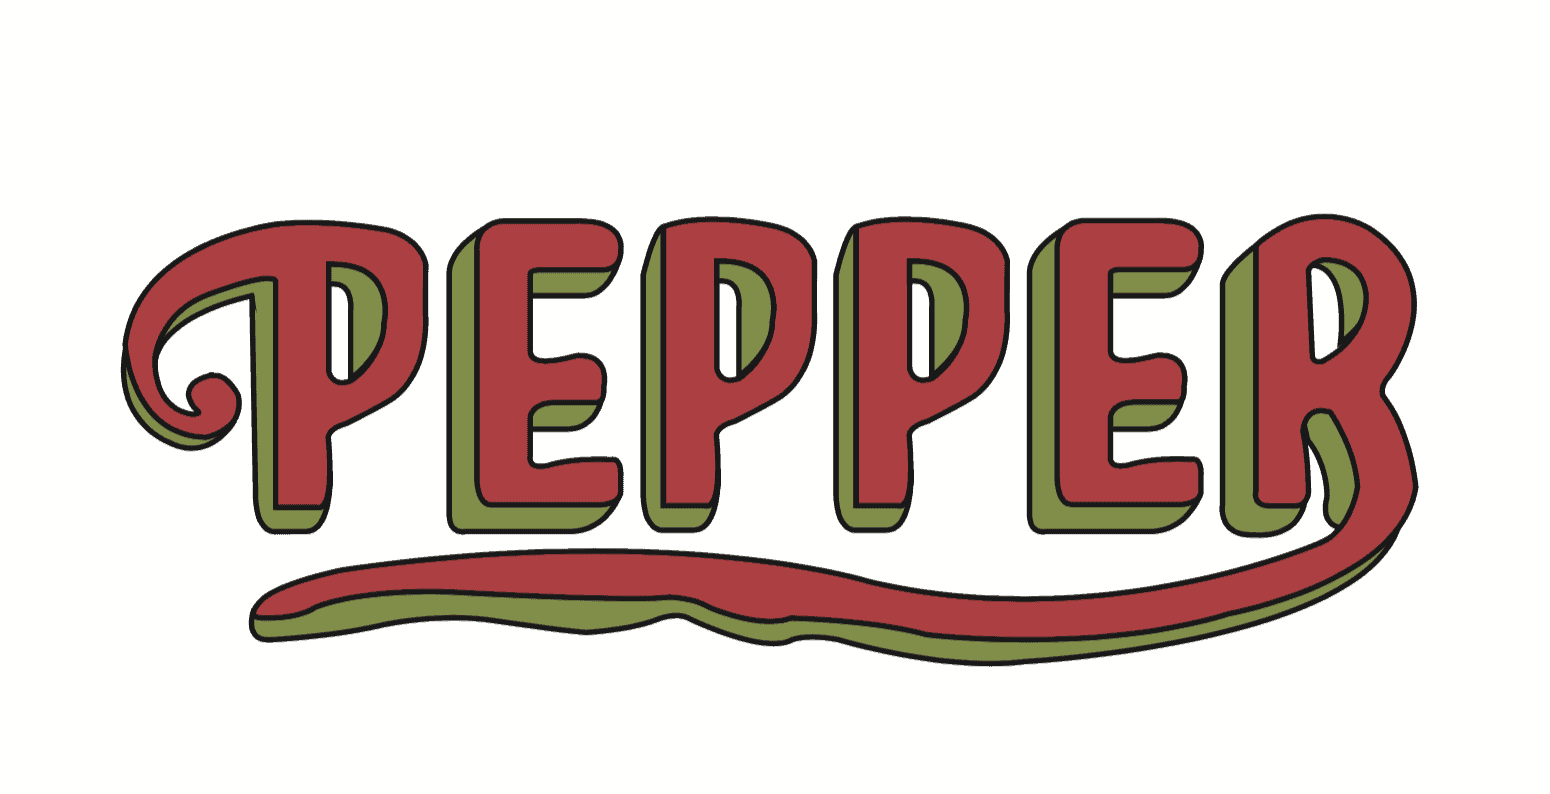 Pepper - Mexican Food